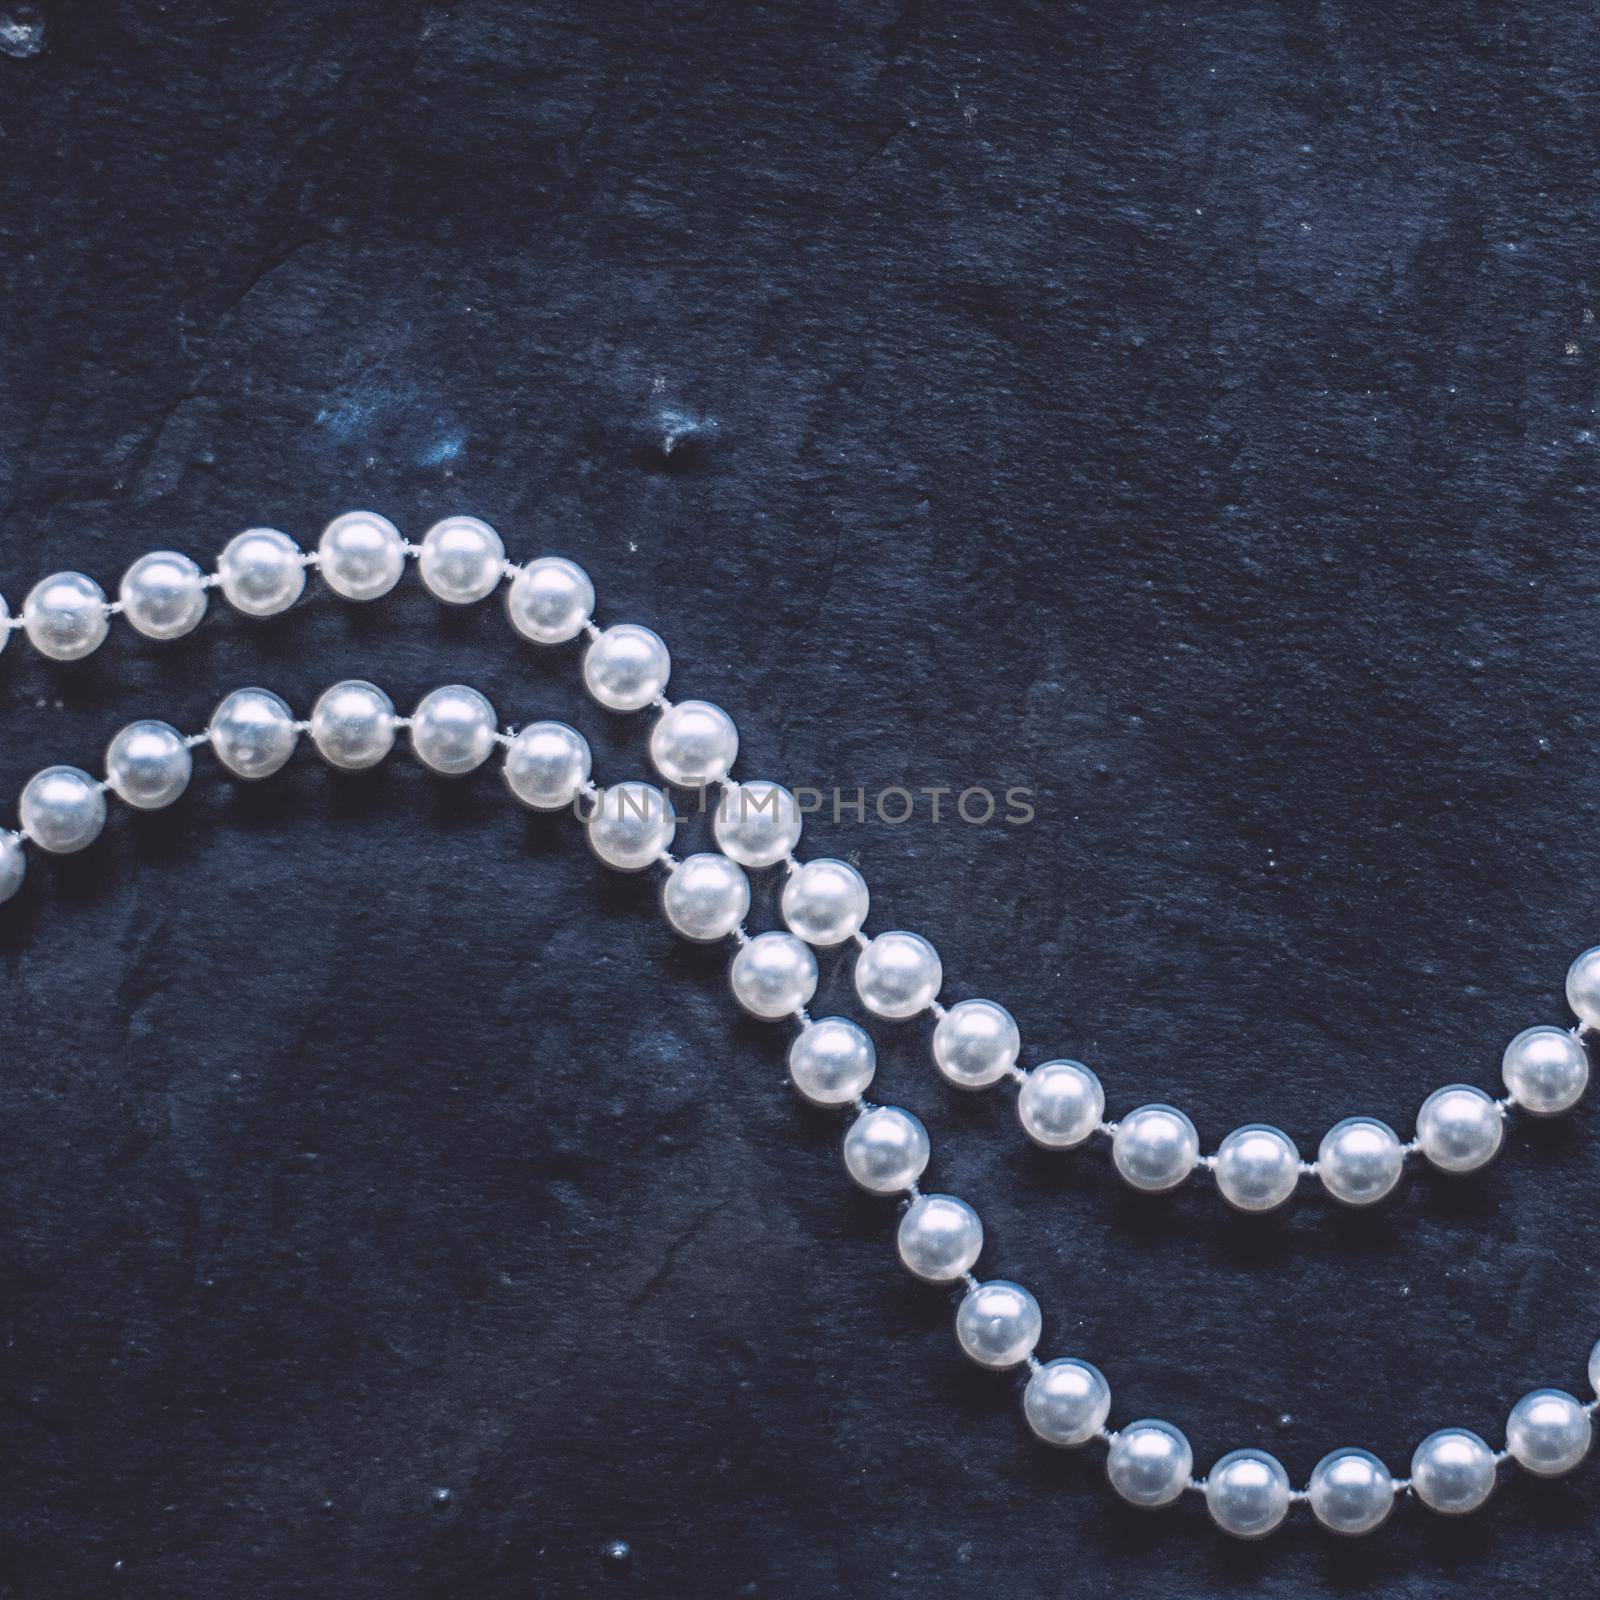 jewelry and luxury gift for her styled concept - wonderful pearl jewellery, elegant visuals